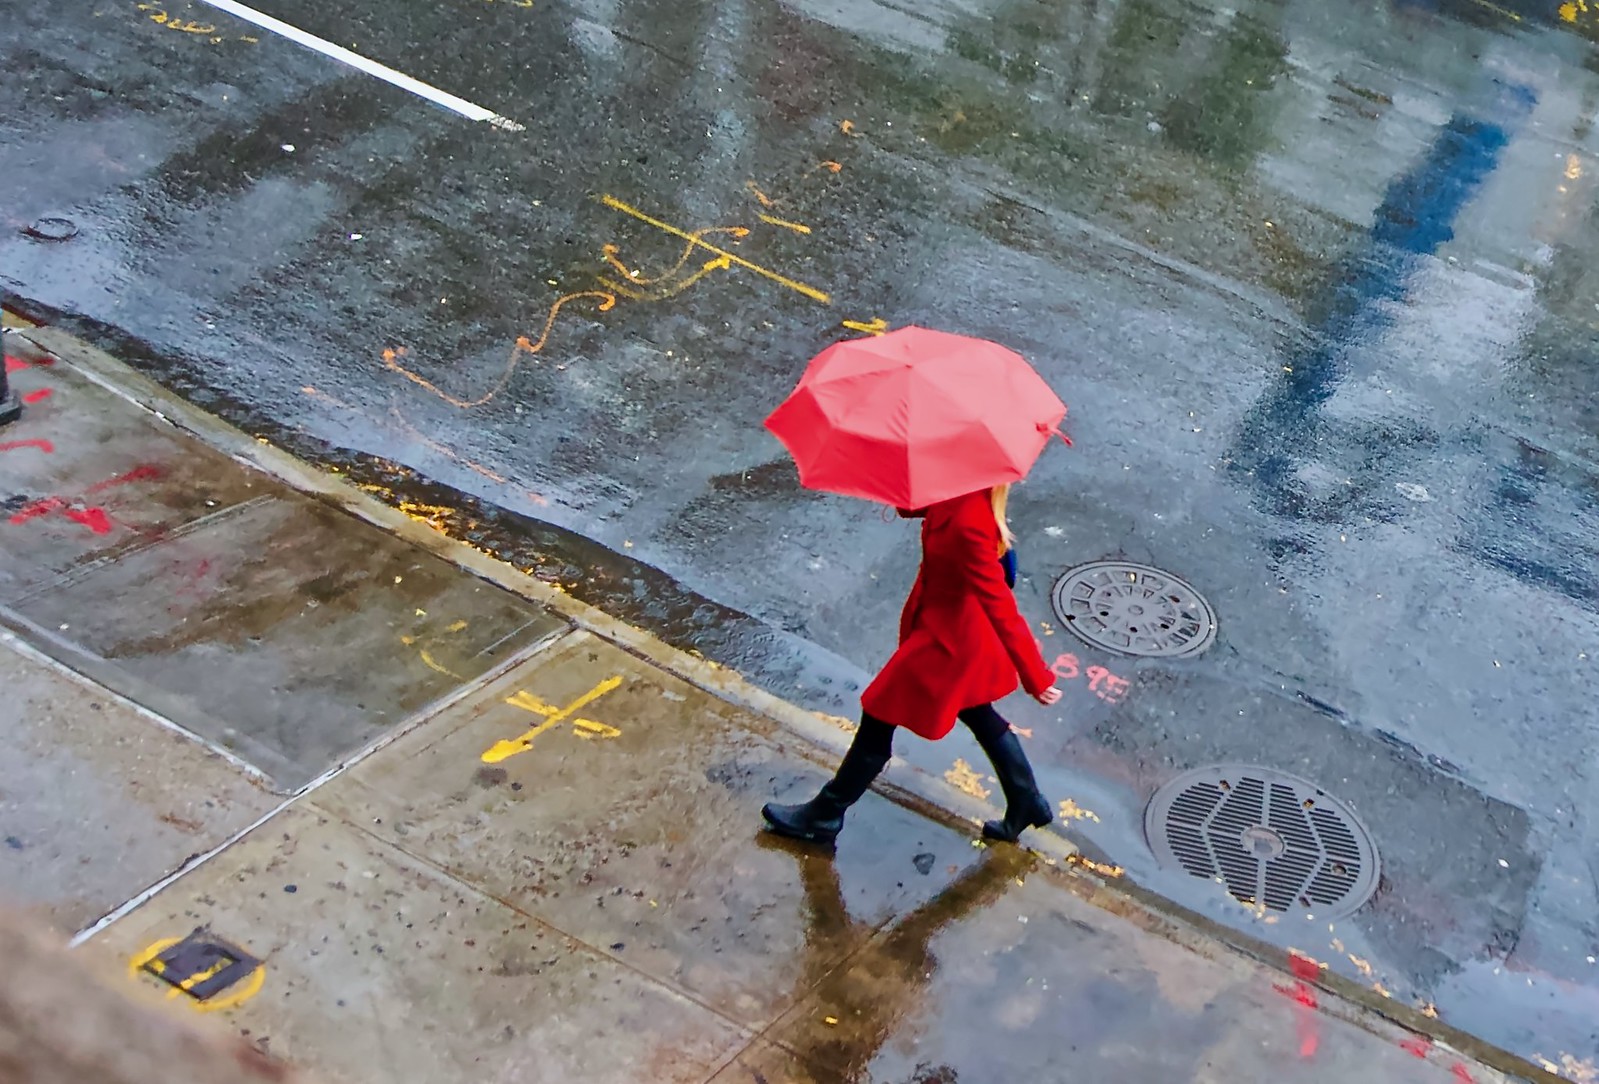 Red Color in Street Photography - The Brightest Shadow